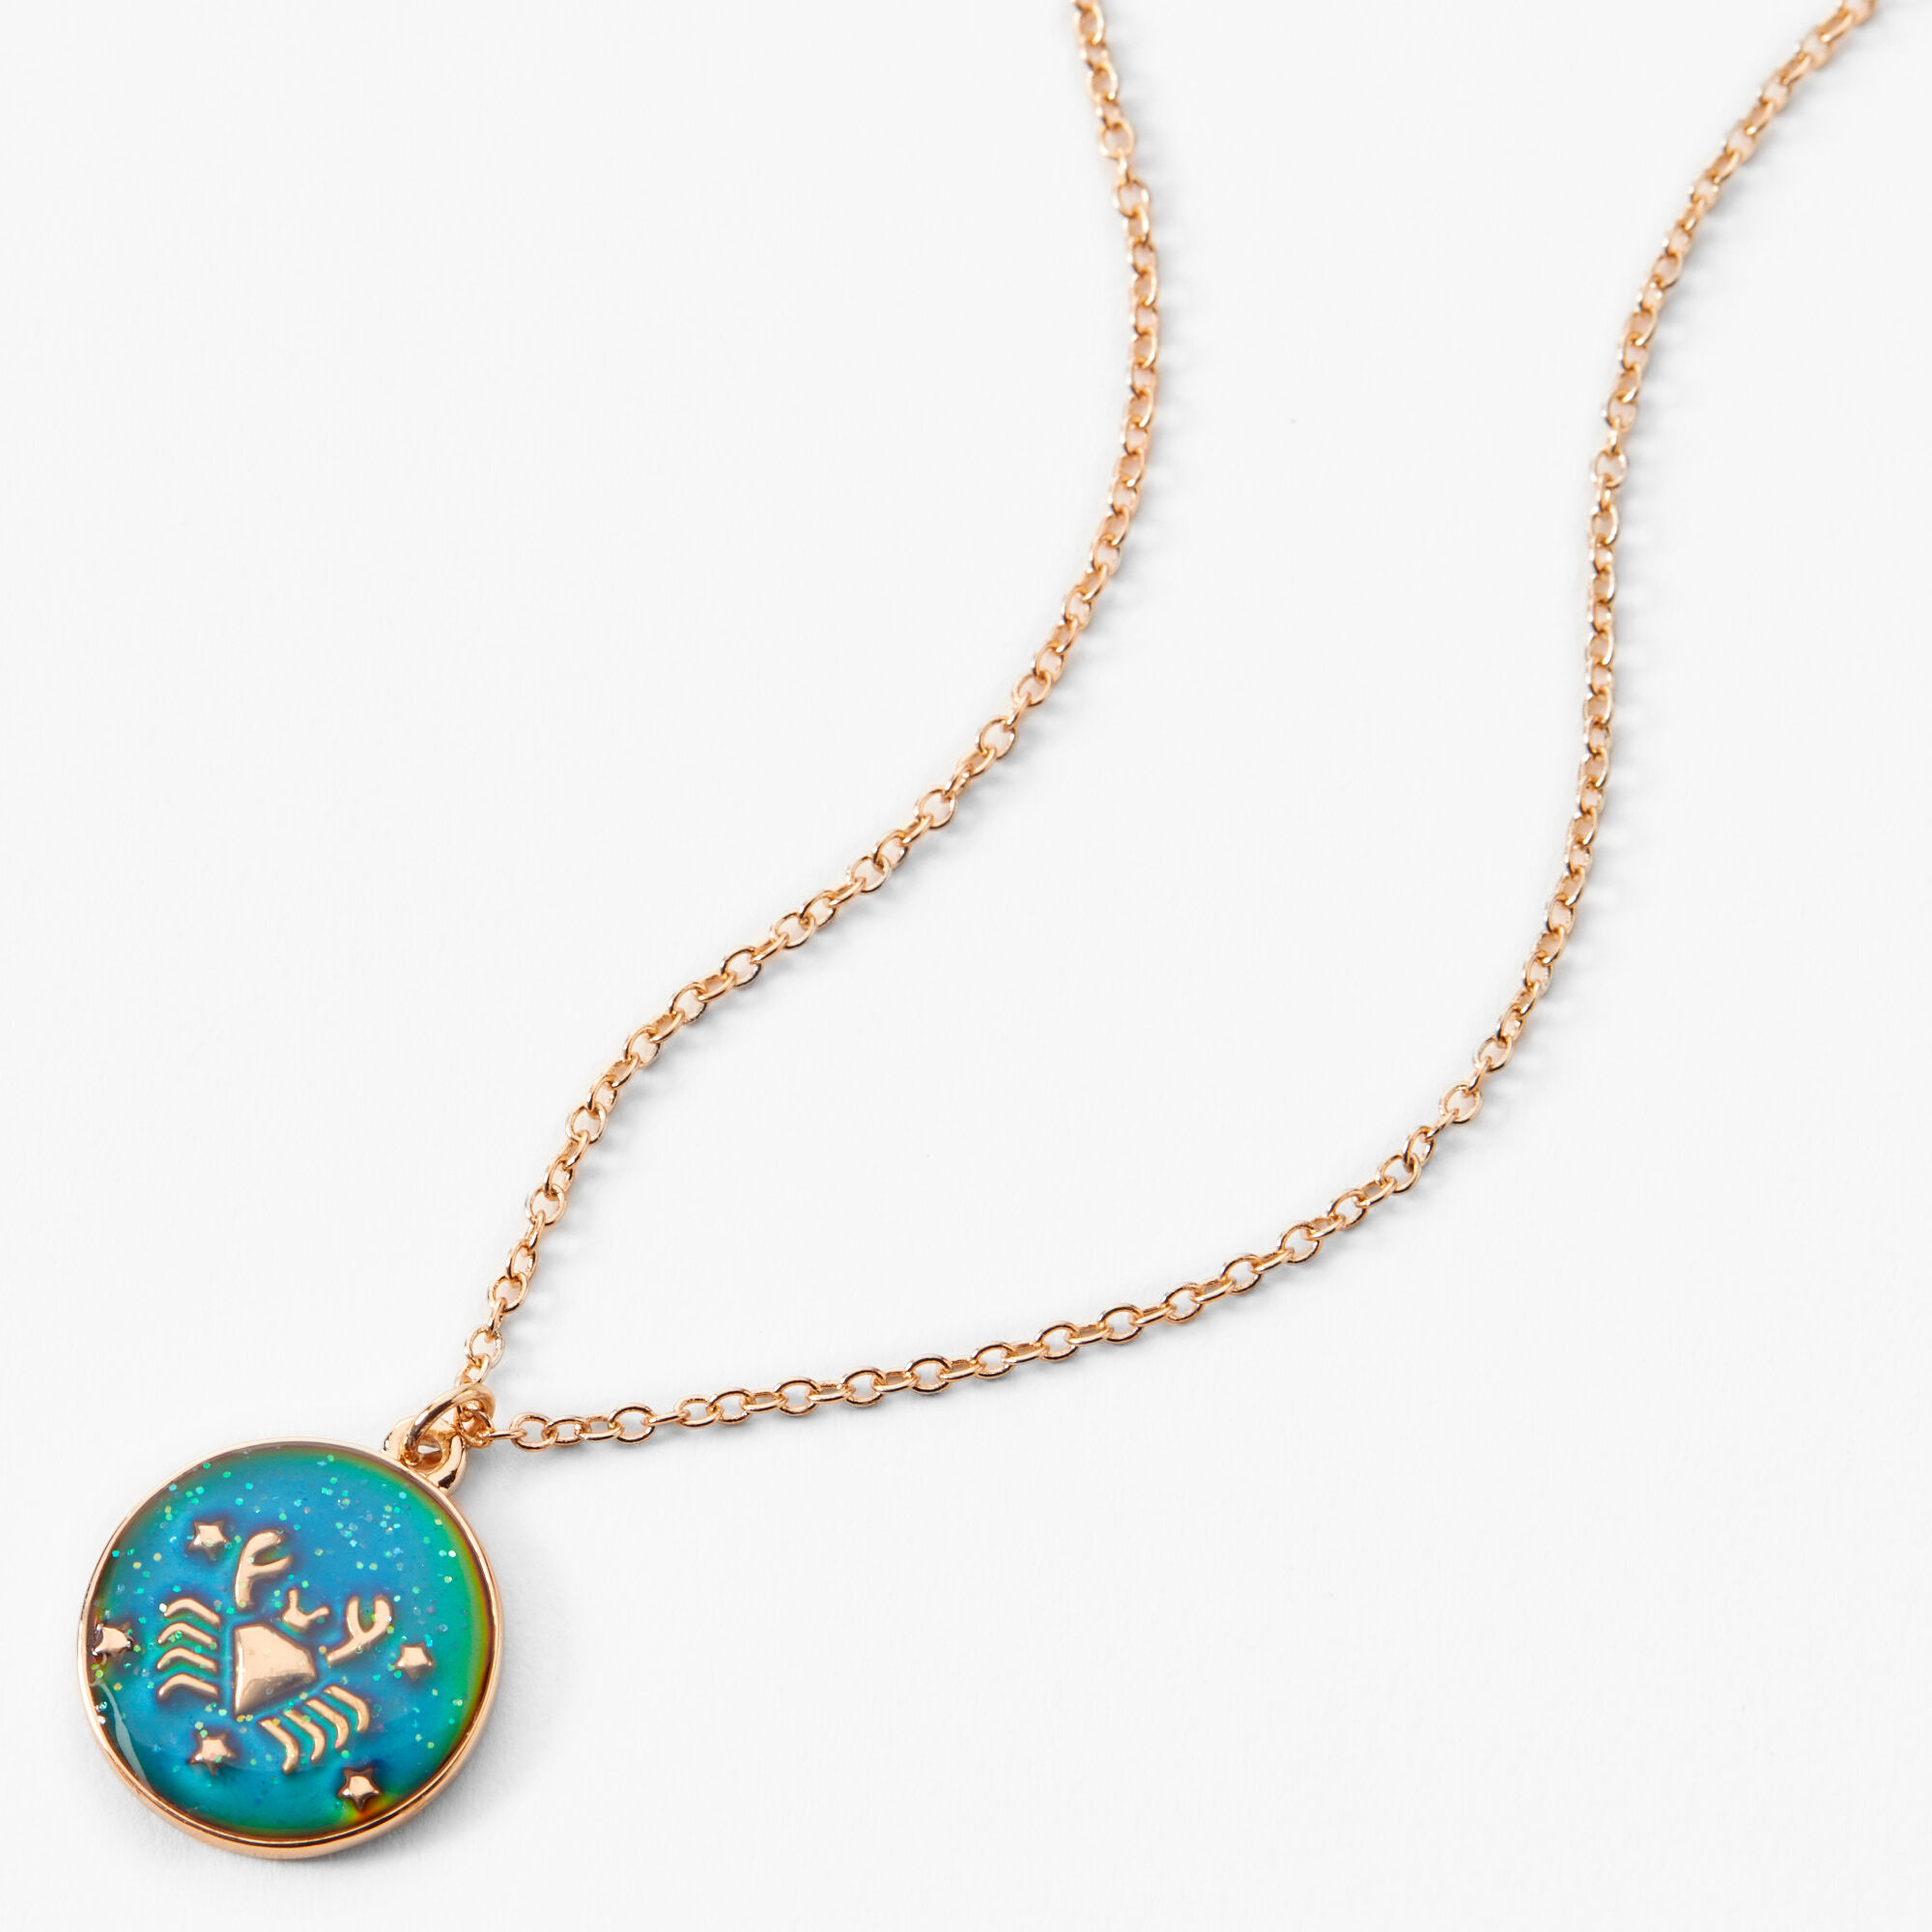 Cancer Sign Constellation Necklace with Crystals – Brooklyn Tag